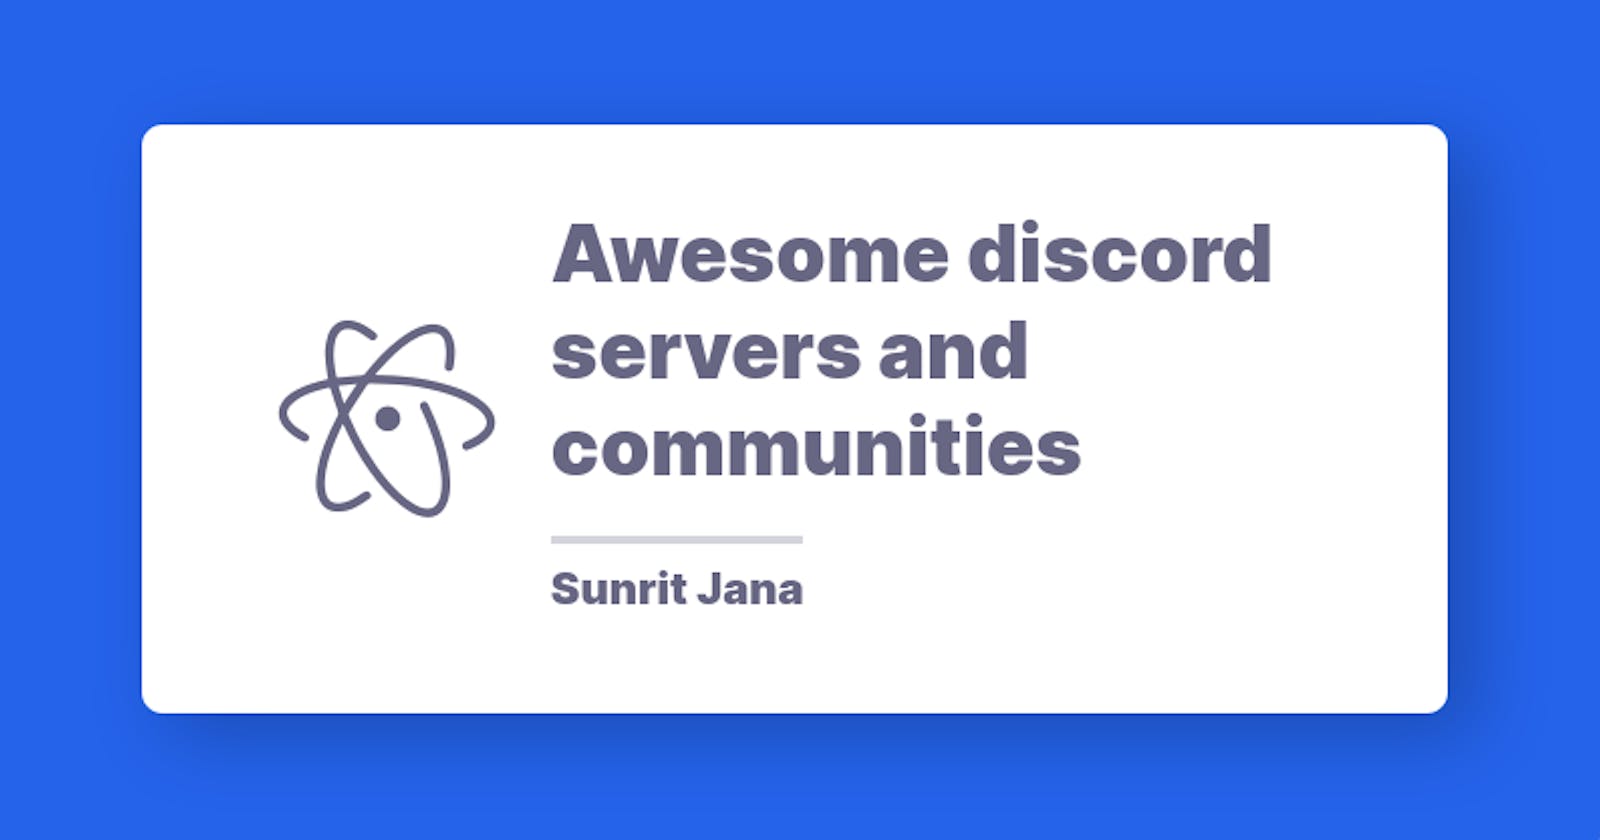 Awesome discord servers and communities